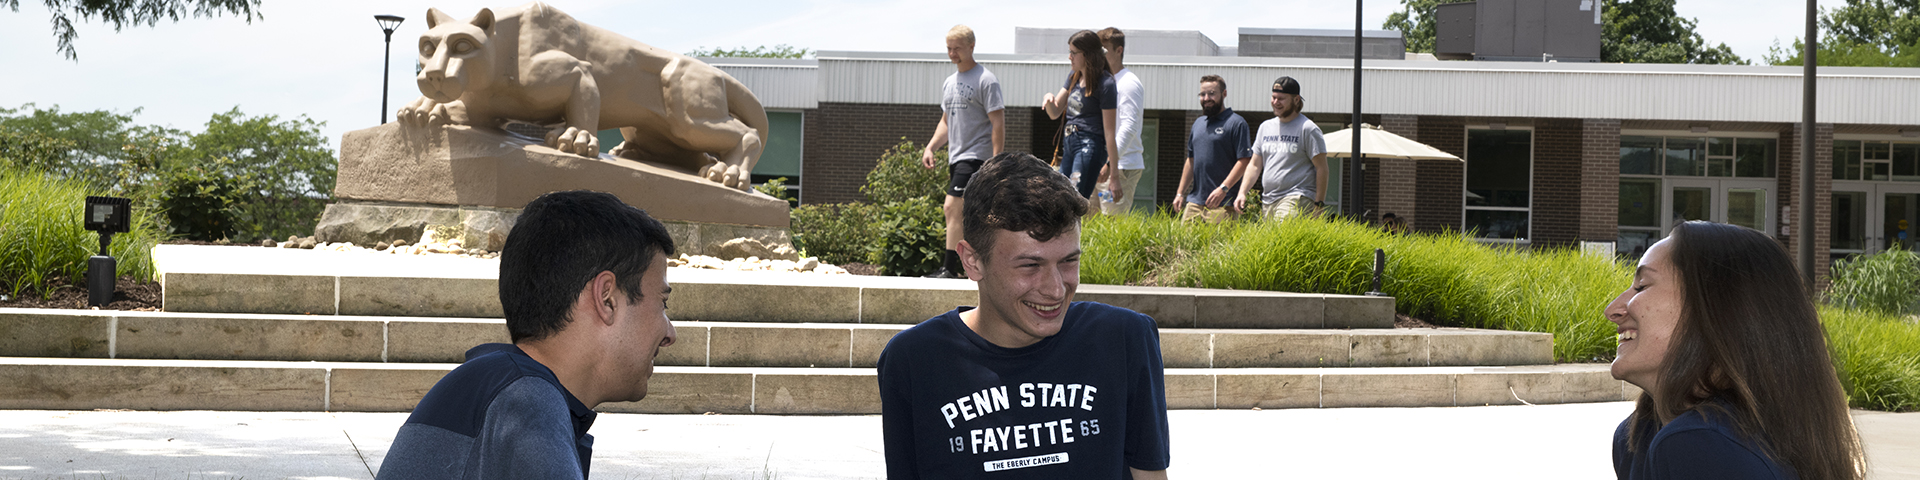 Several students sitting in front of the lion shrine and others walking behind the shrine. 